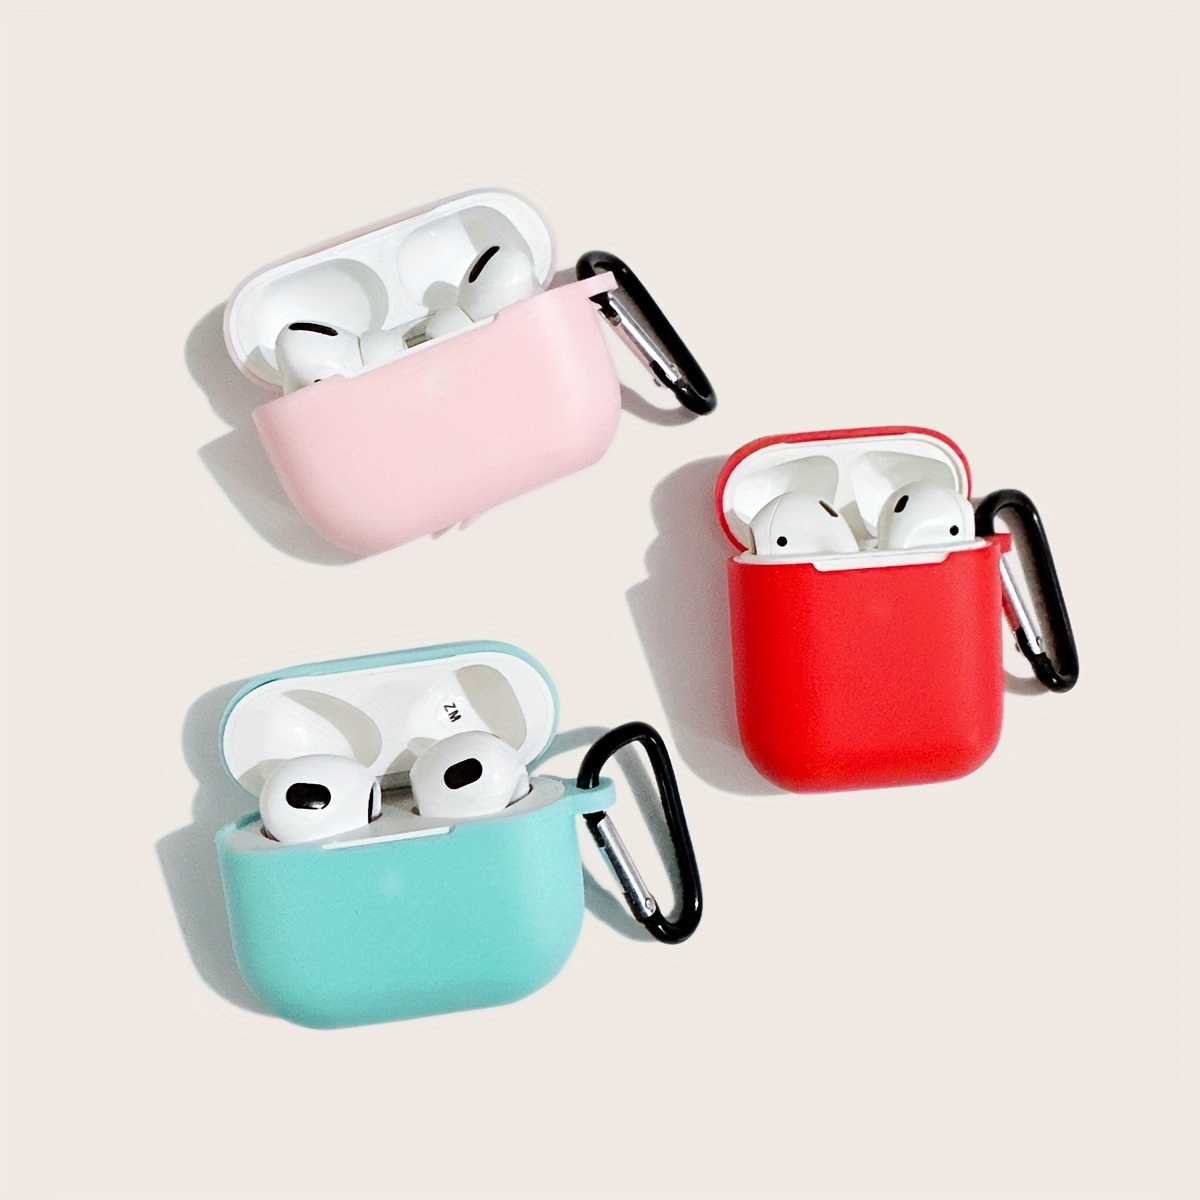 Compatible with Airpods 1/2 Case Cover, Cute Cartoon Fruit Funny Fun Cool  Kawaii Fashion, 3D Silicone Designer Airpod Character Skin, Girls Boys  Teens, Case for Air pods 1&2 